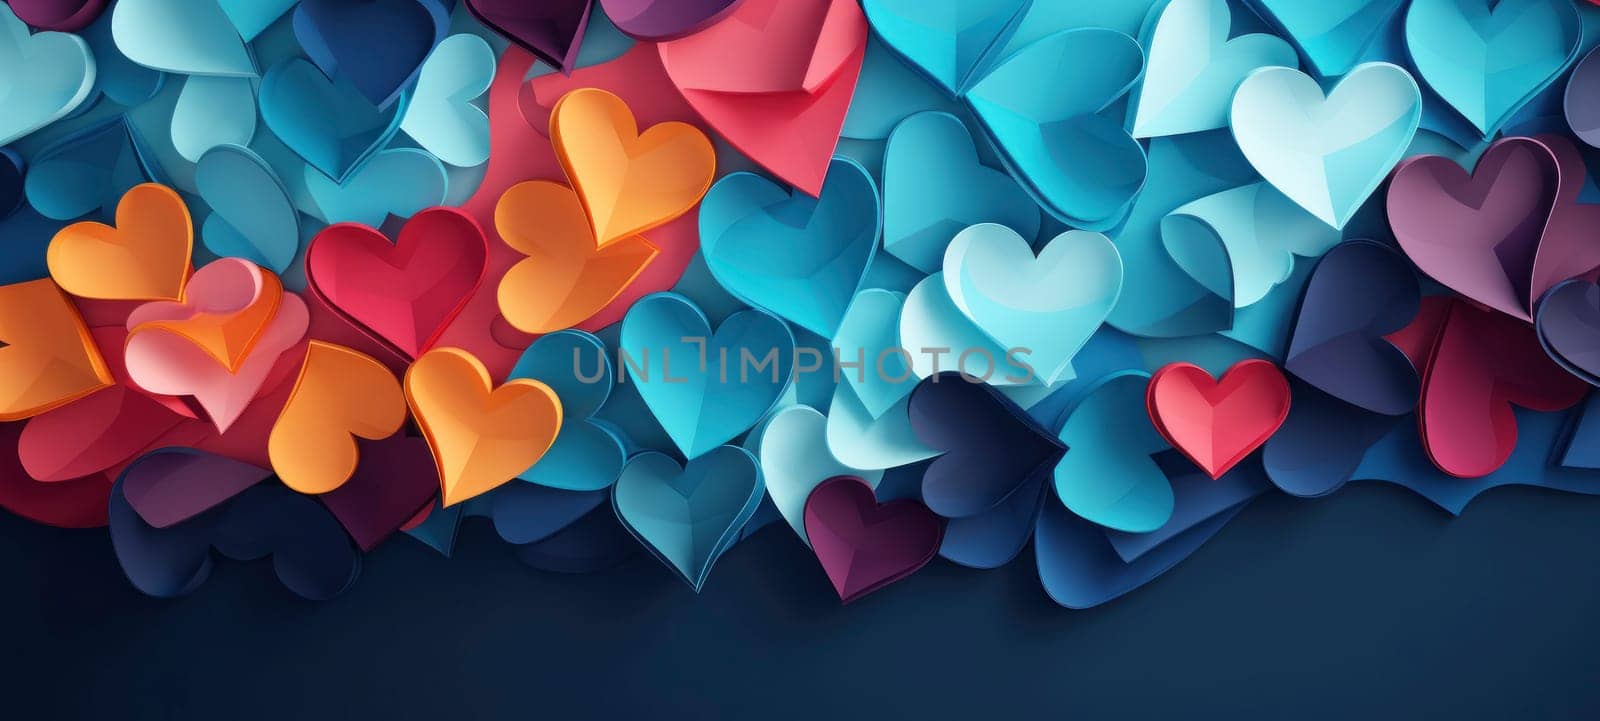 Multicolored Paper Hearts on Blue Background by andreyz